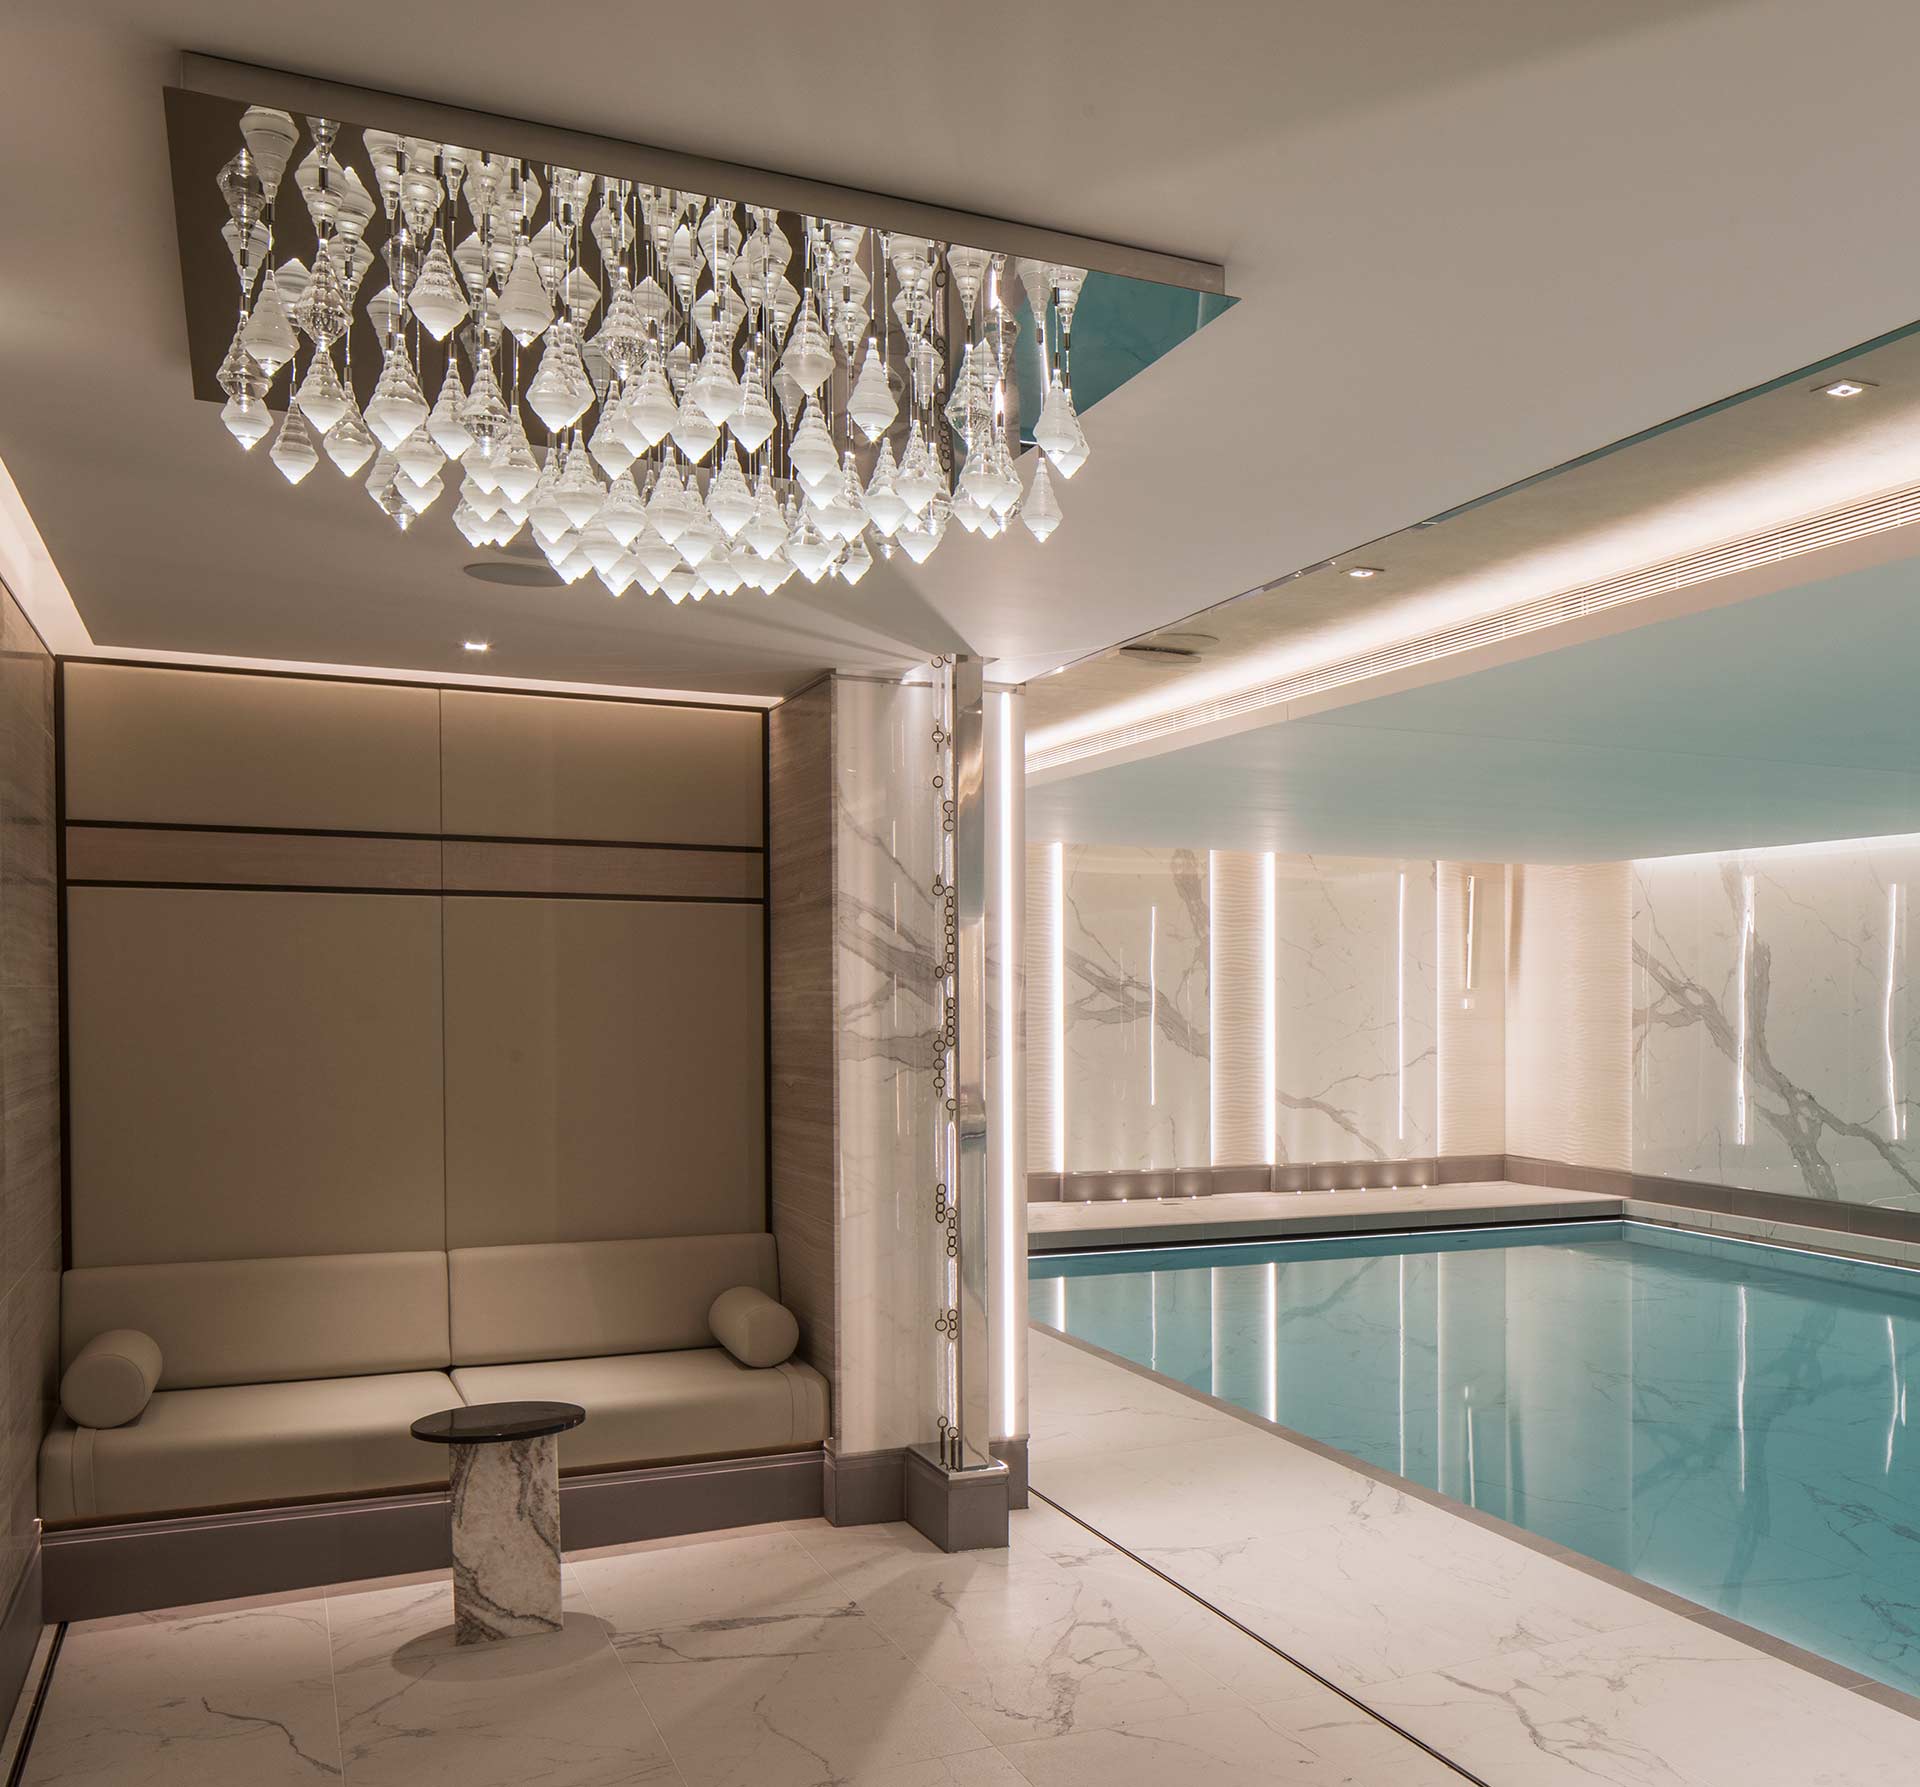 Feature Chandelier Suspended Droplet Design Square Reflective Base Luxury Health Club Swimming Pool London Designers Nulty Bespoke